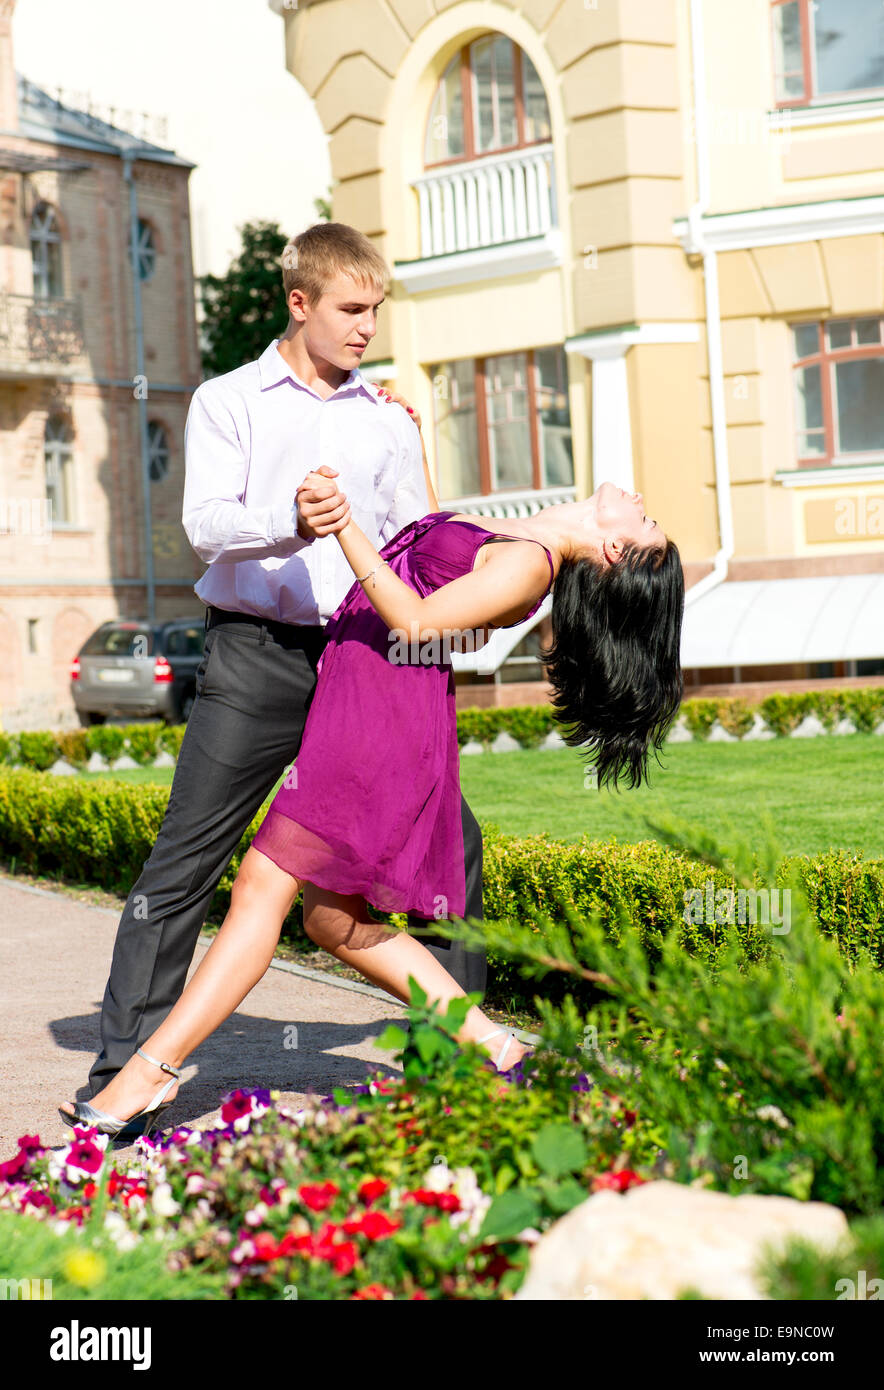 Young couple dancing on street Stock Photo